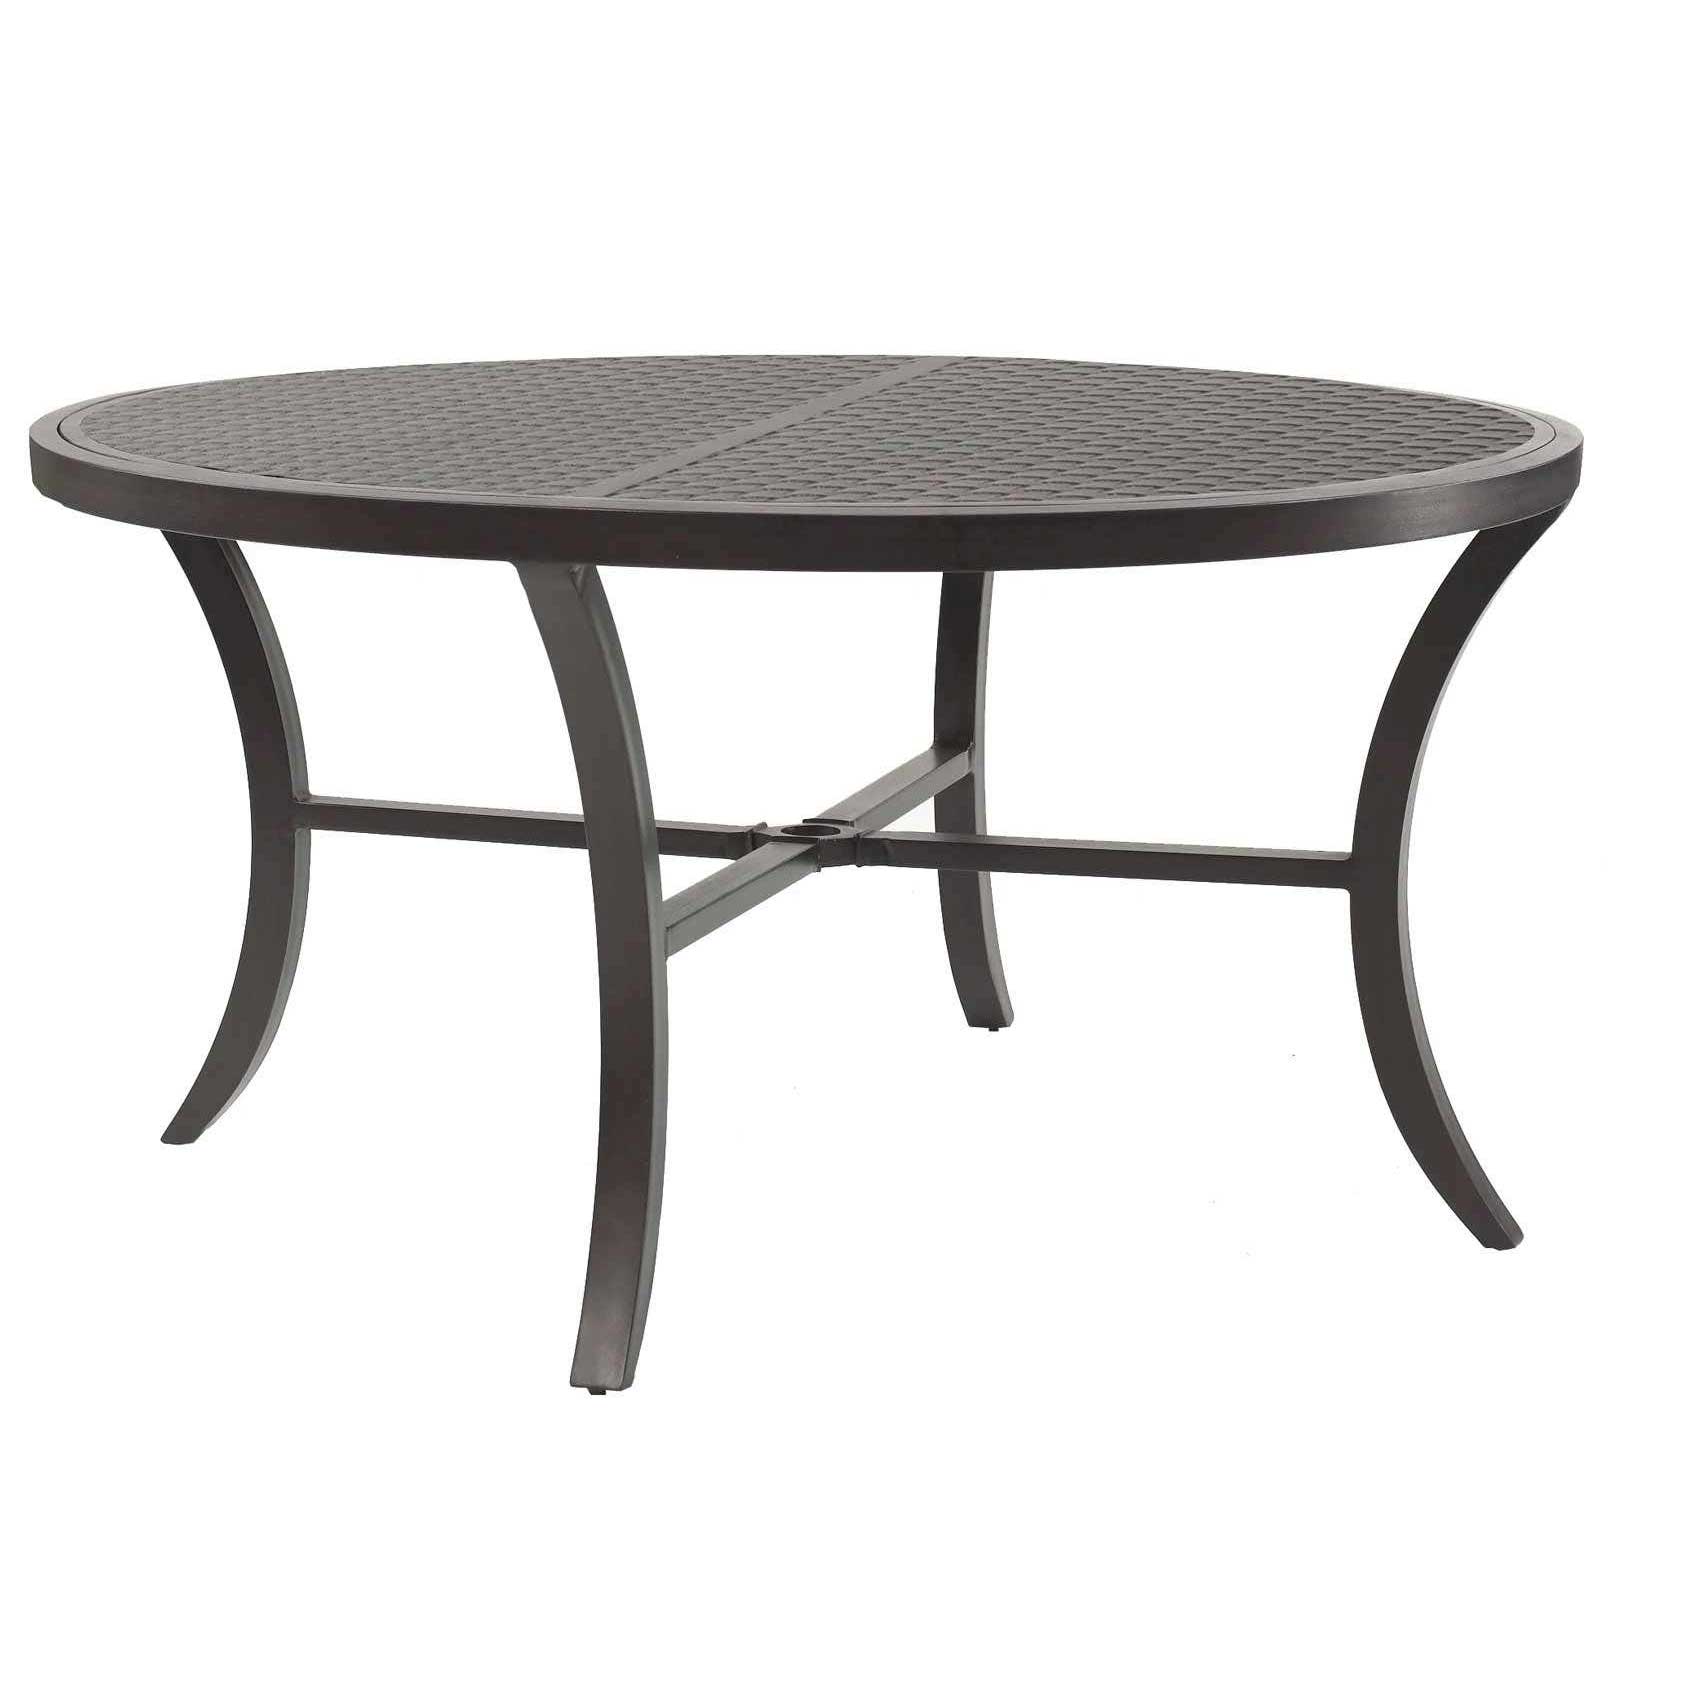 Castelle Classical 54 inch Round Dining Table with Live Edge Driftwood Top and Antique Dark Rum Finish Outdoor Tables 12026480